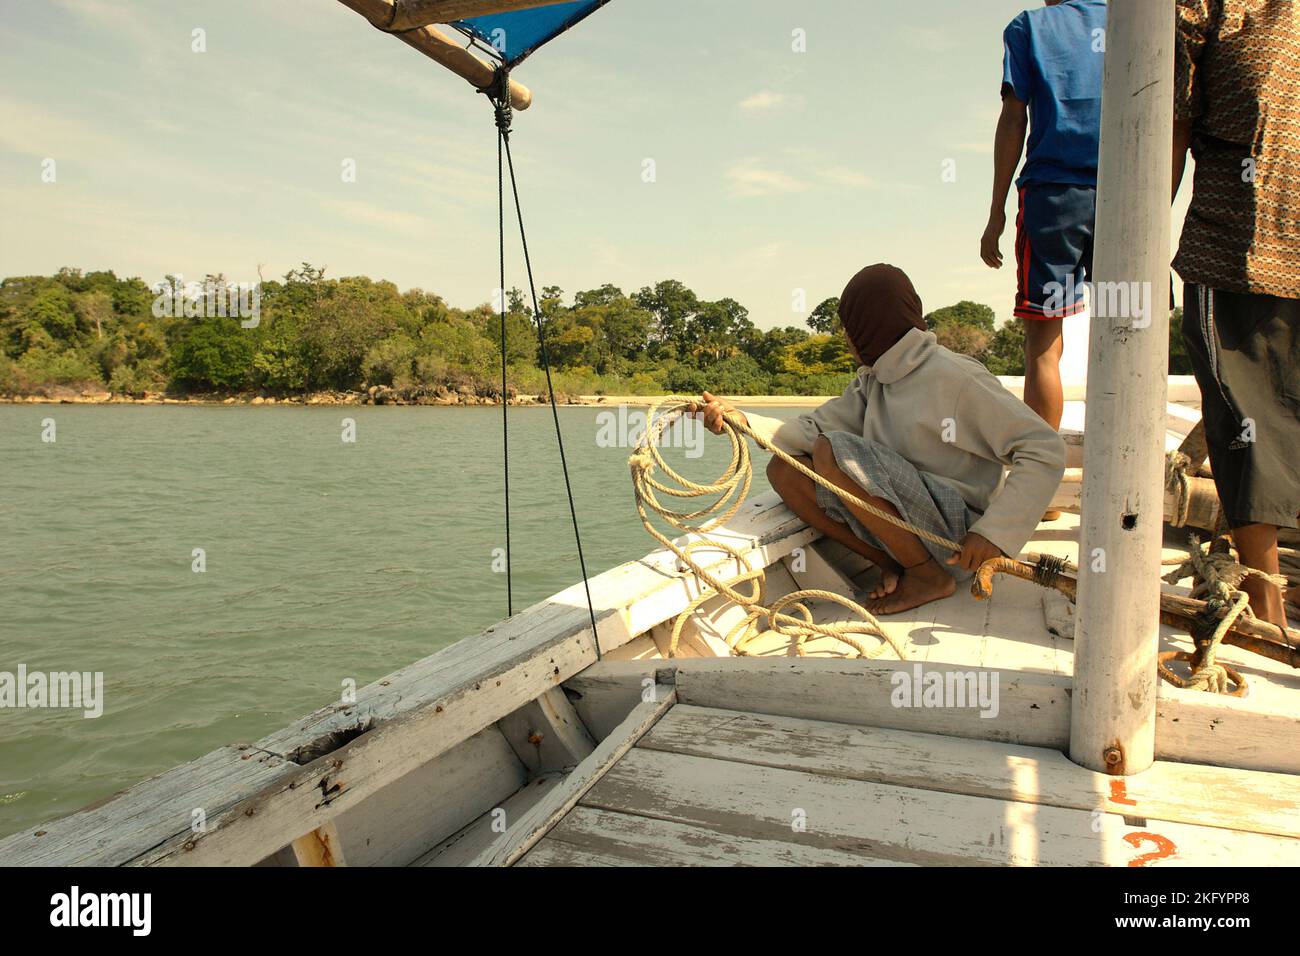 Boat crews are about to throw an anchor as a hired boat is floating on the coastal water of Handeleum Island, a part of Ujung Kulon National Park area in Pandeglang, Banten, Indonesia. Stock Photo